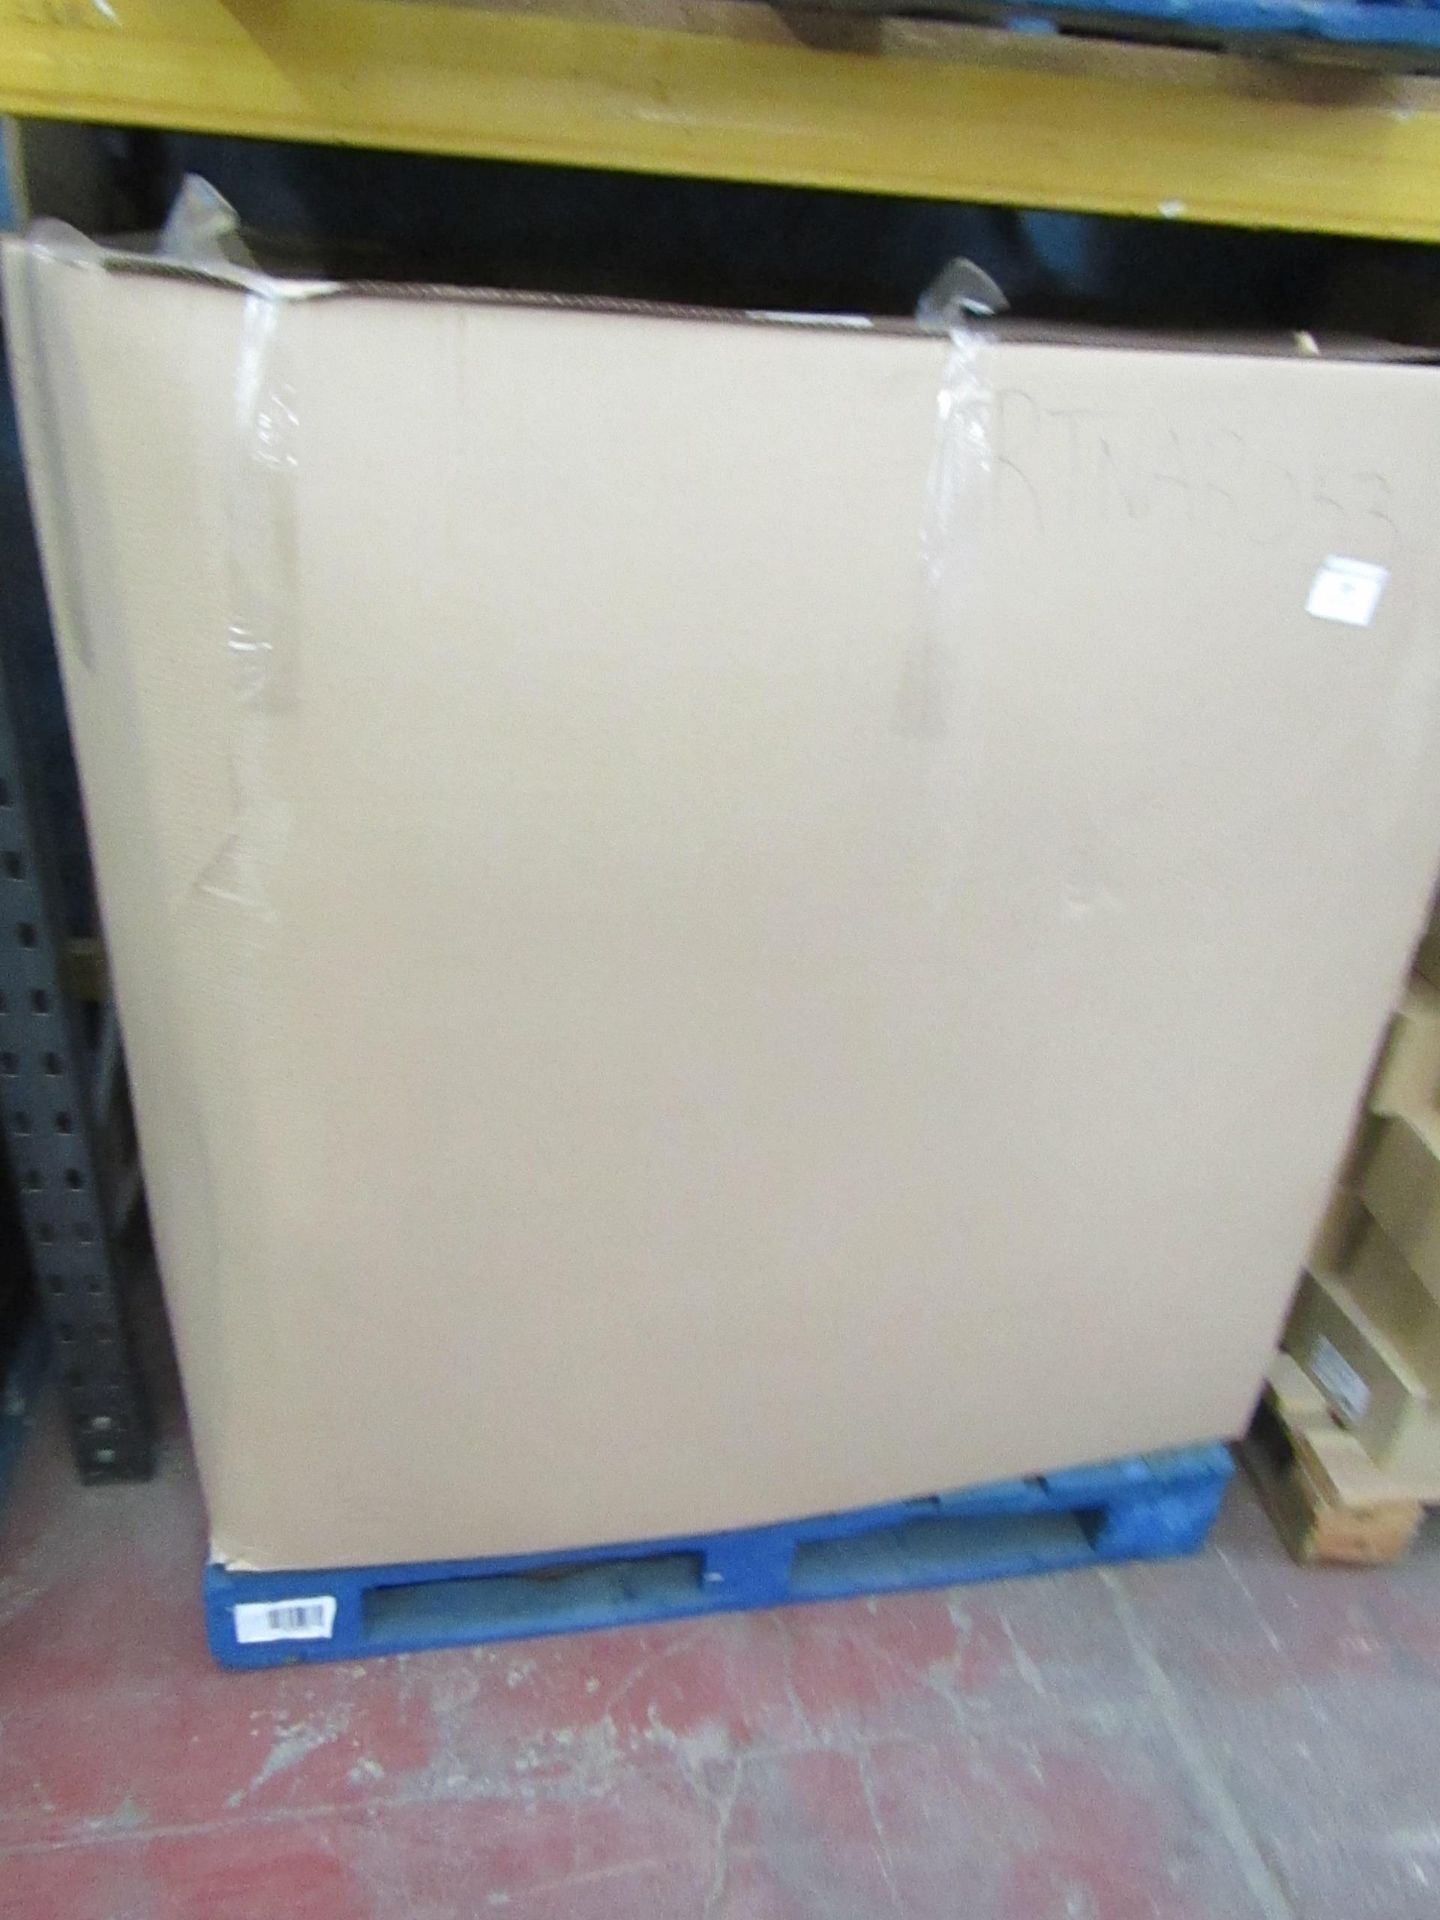 | 34X | THE PALLET CONTAINS VARIOUS SIZED YAWN AIR BEDS | BOXED AND UNCHECKED | NO ONLINE RE-